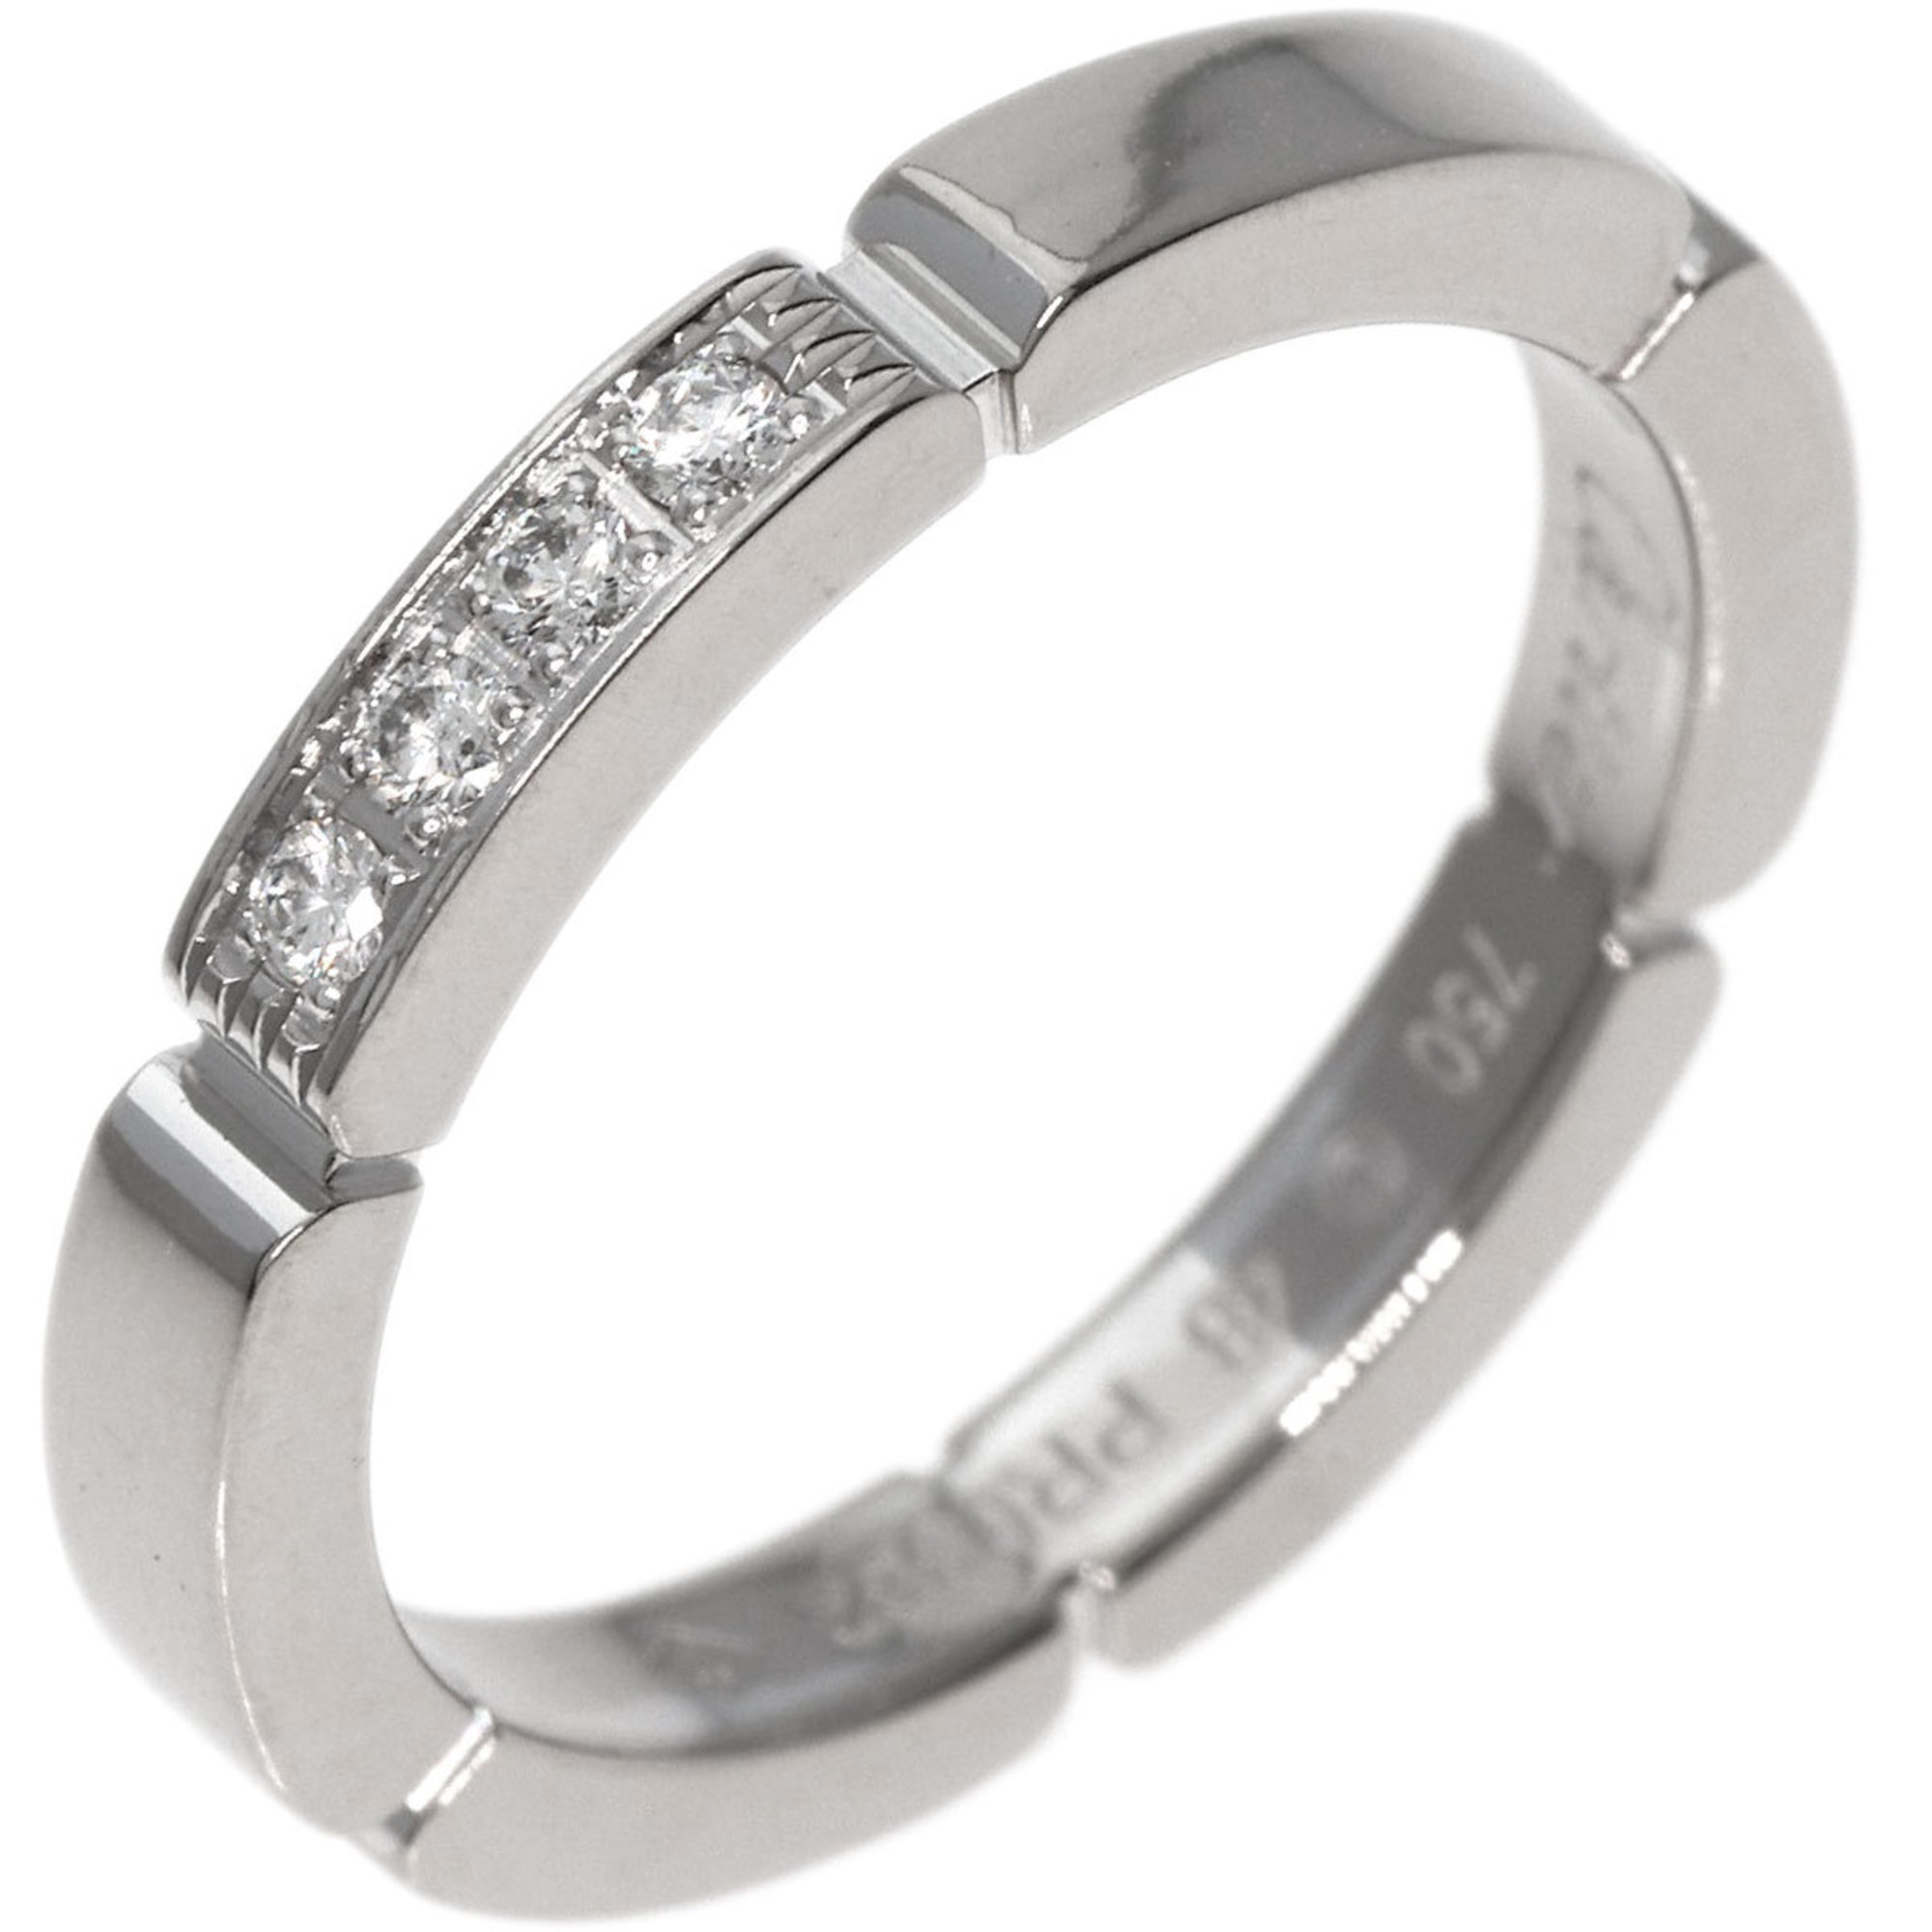 Cartier Maillon Panthere 4P Diamond #48 Ring, K18 White Gold, Women's, CARTIER